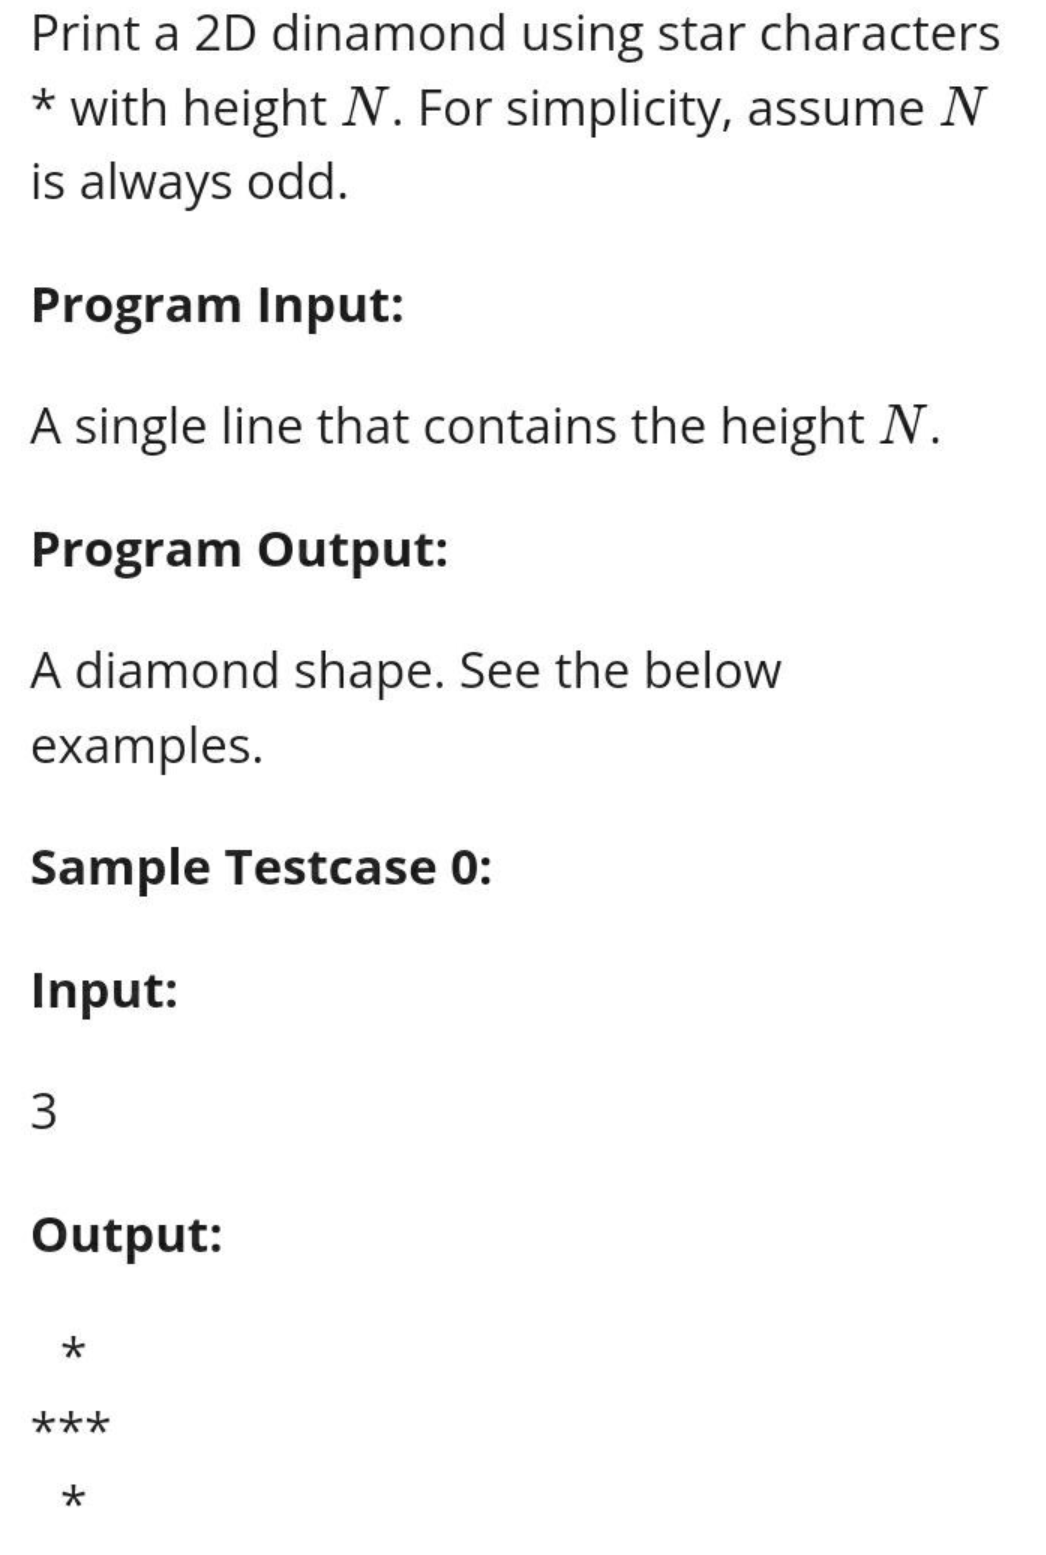 Print a 2D dinamond using star characters
* with height N. For simplicity, assume N
is always odd.
Program Input:
A single line that contains the height N.
Program Output:
A diamond shape. See the below
examples.
Sample Testcase 0:
Input:
3
Output:
***